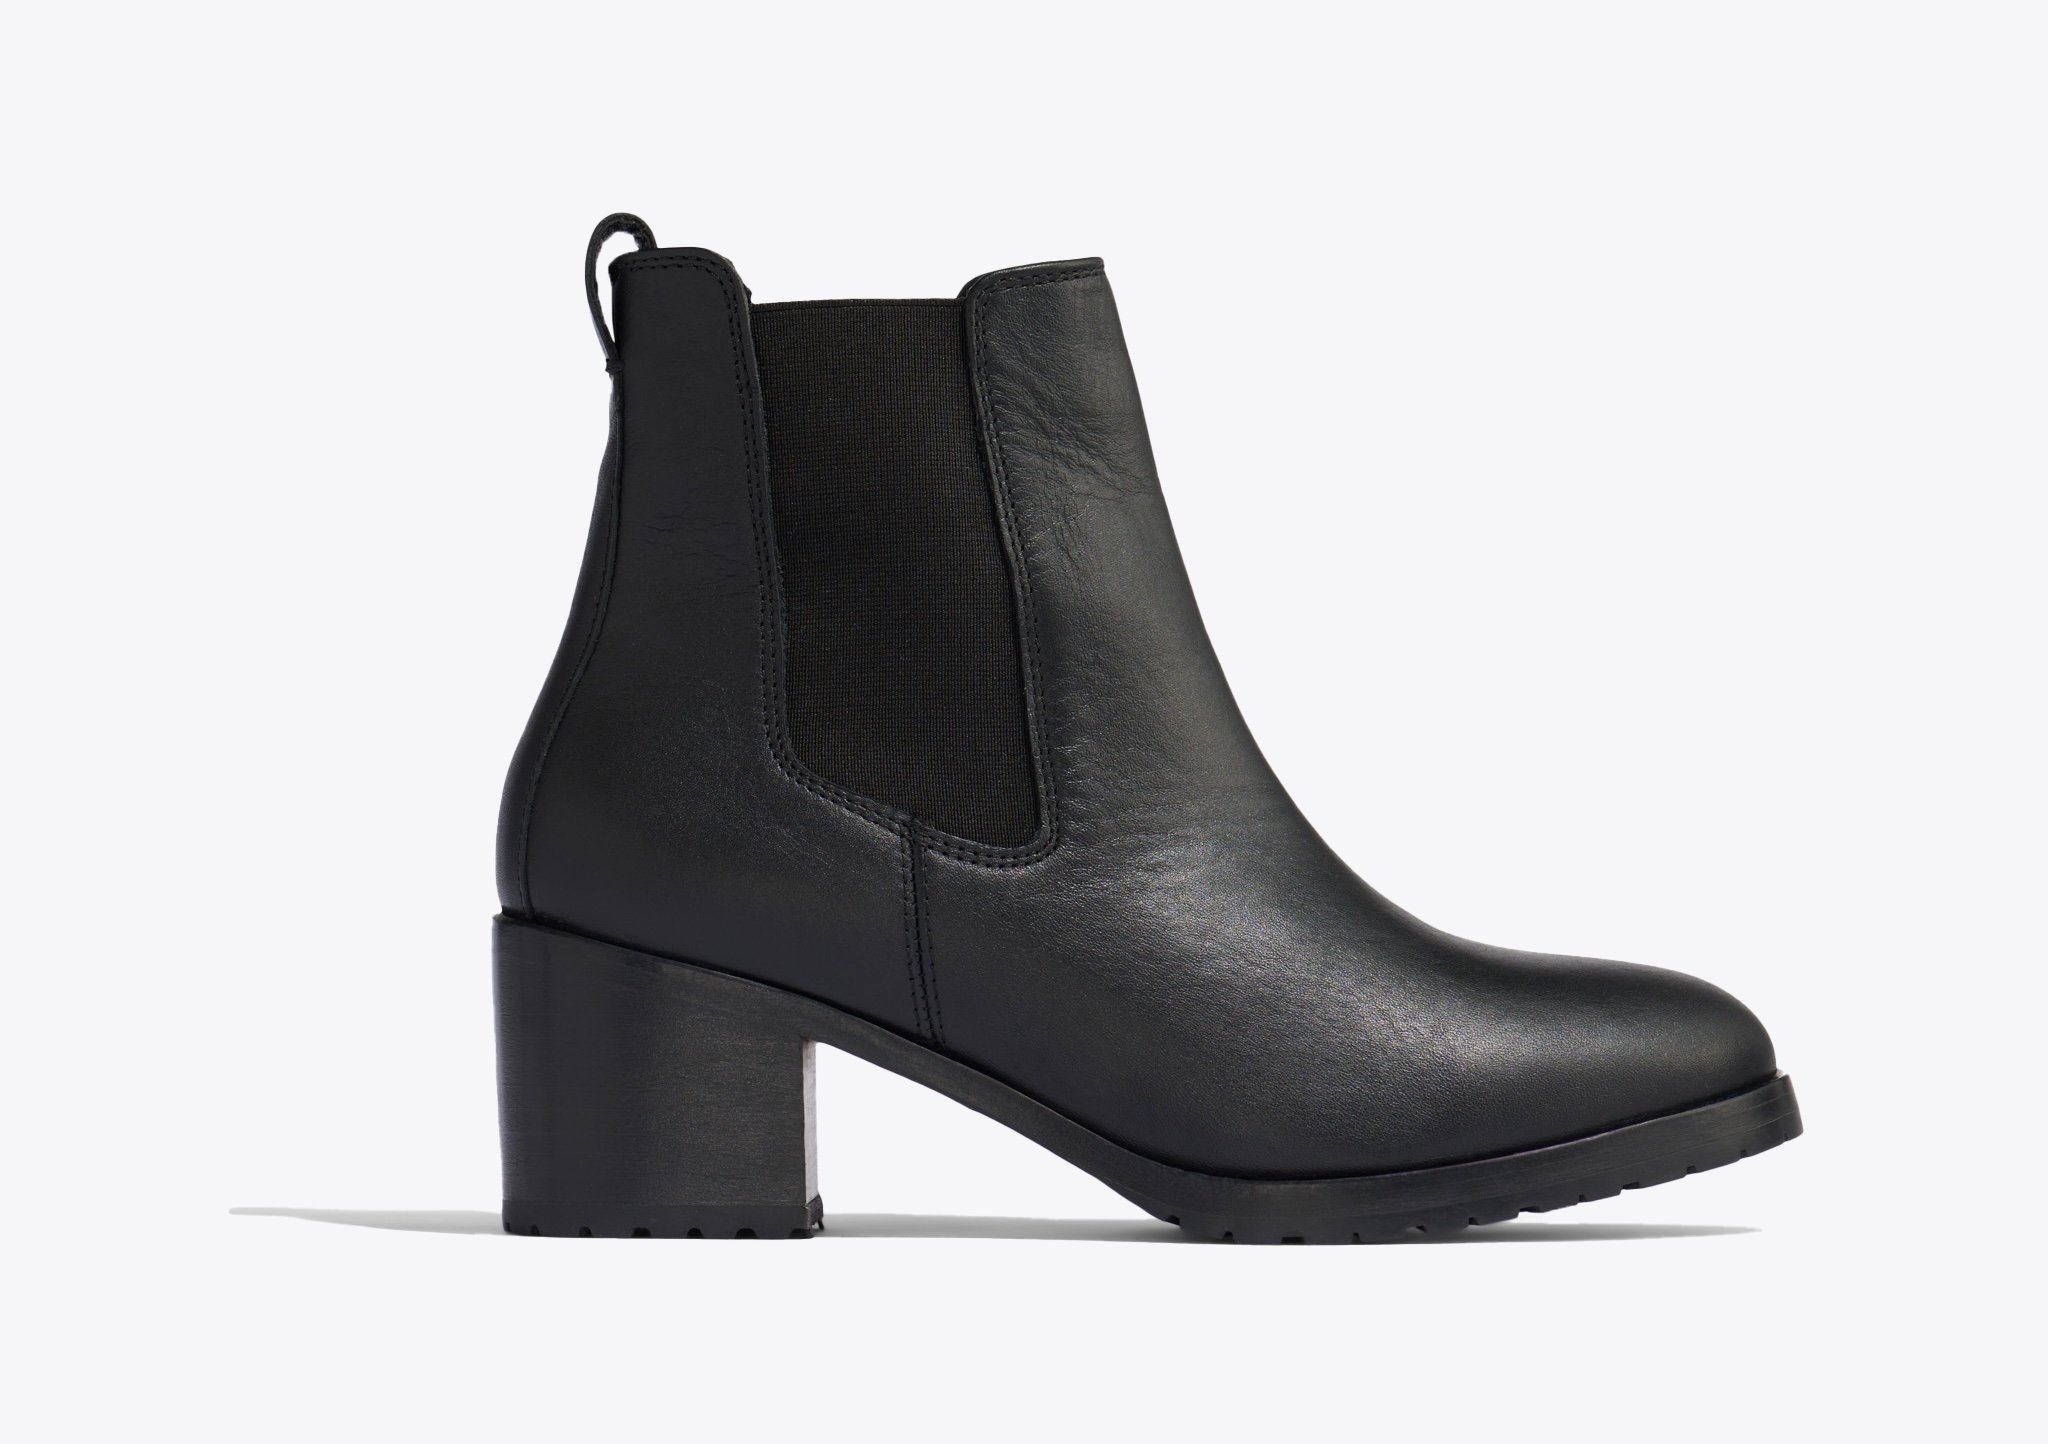 Nisolo Ana Go-To Heeled Chelsea Boot Black/Black - Every Nisolo product is built on the foundation of comfort, function, and design. 